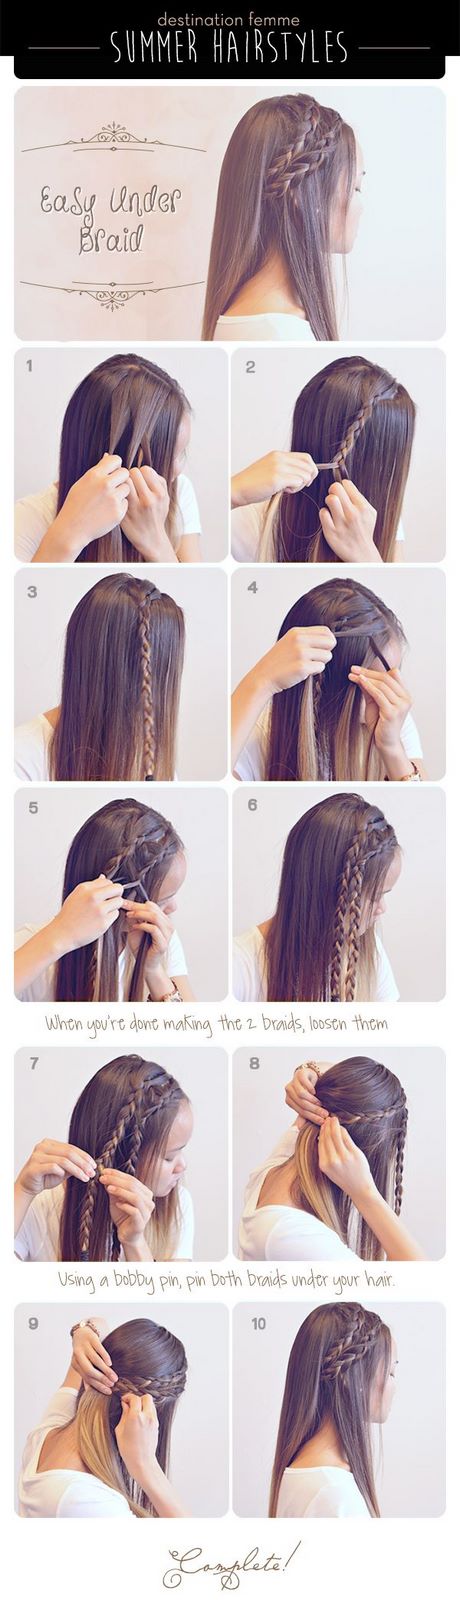 Easy hairstyles for straightened hair easy-hairstyles-for-straightened-hair-33_10